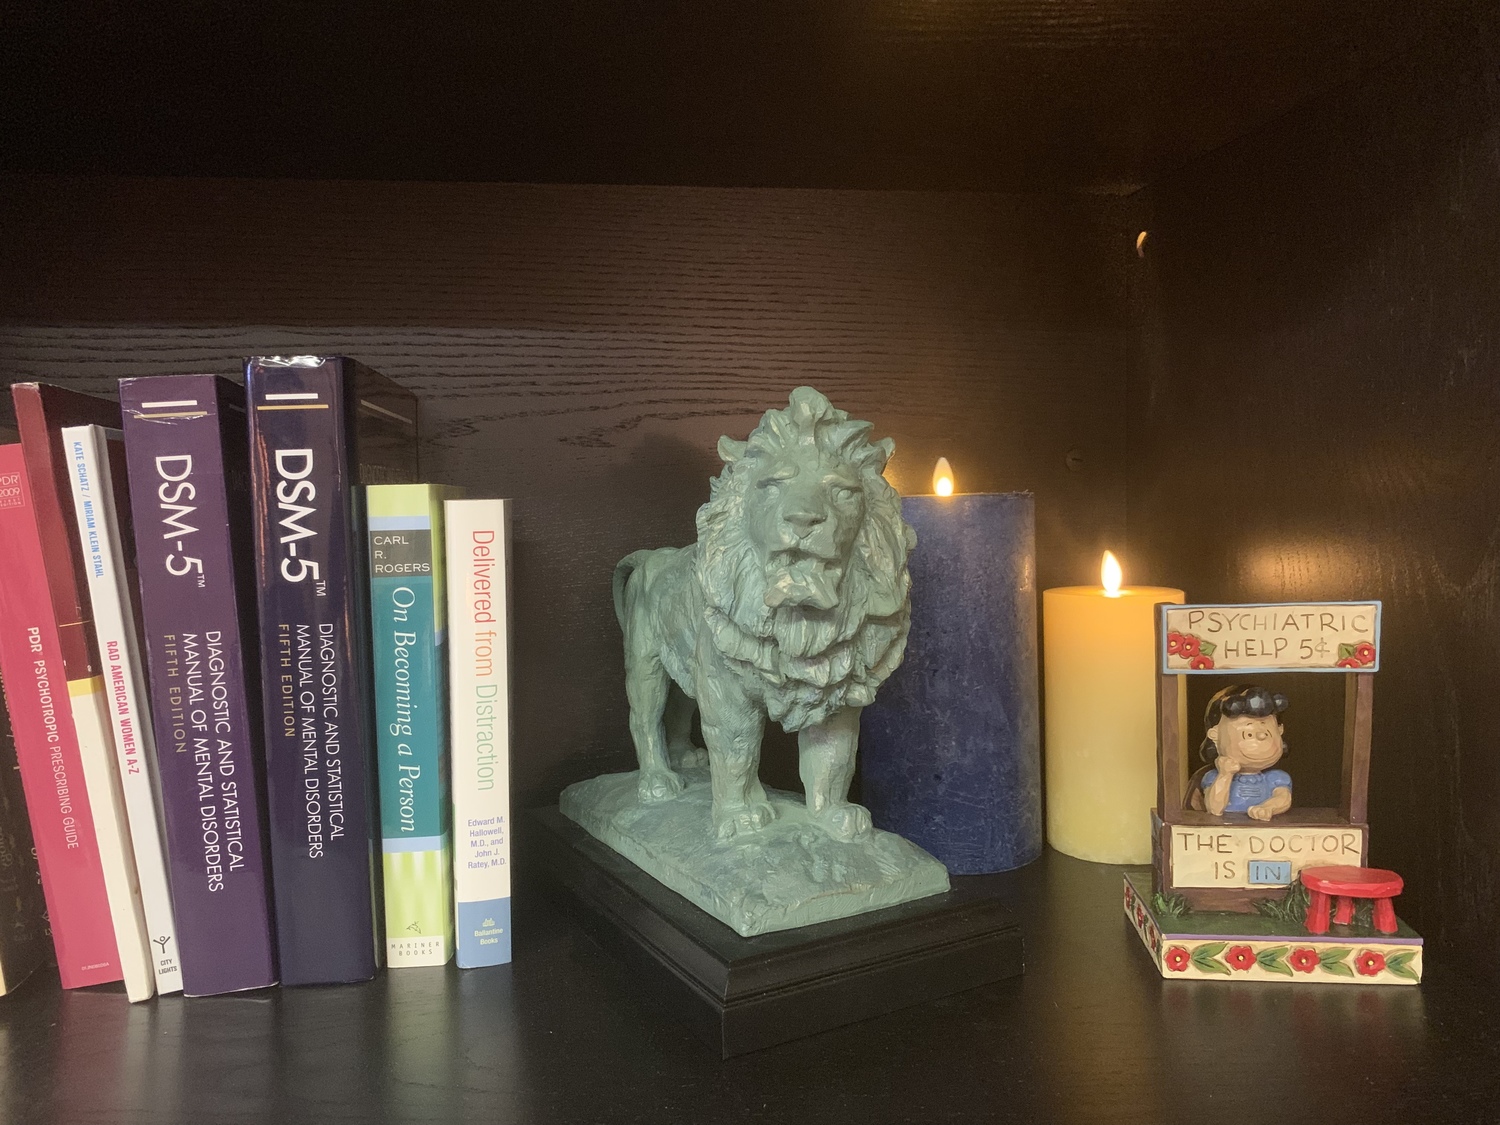 Gallery Photo of Books of the trade, Lucy, and my favorite Chicago lion bookend!